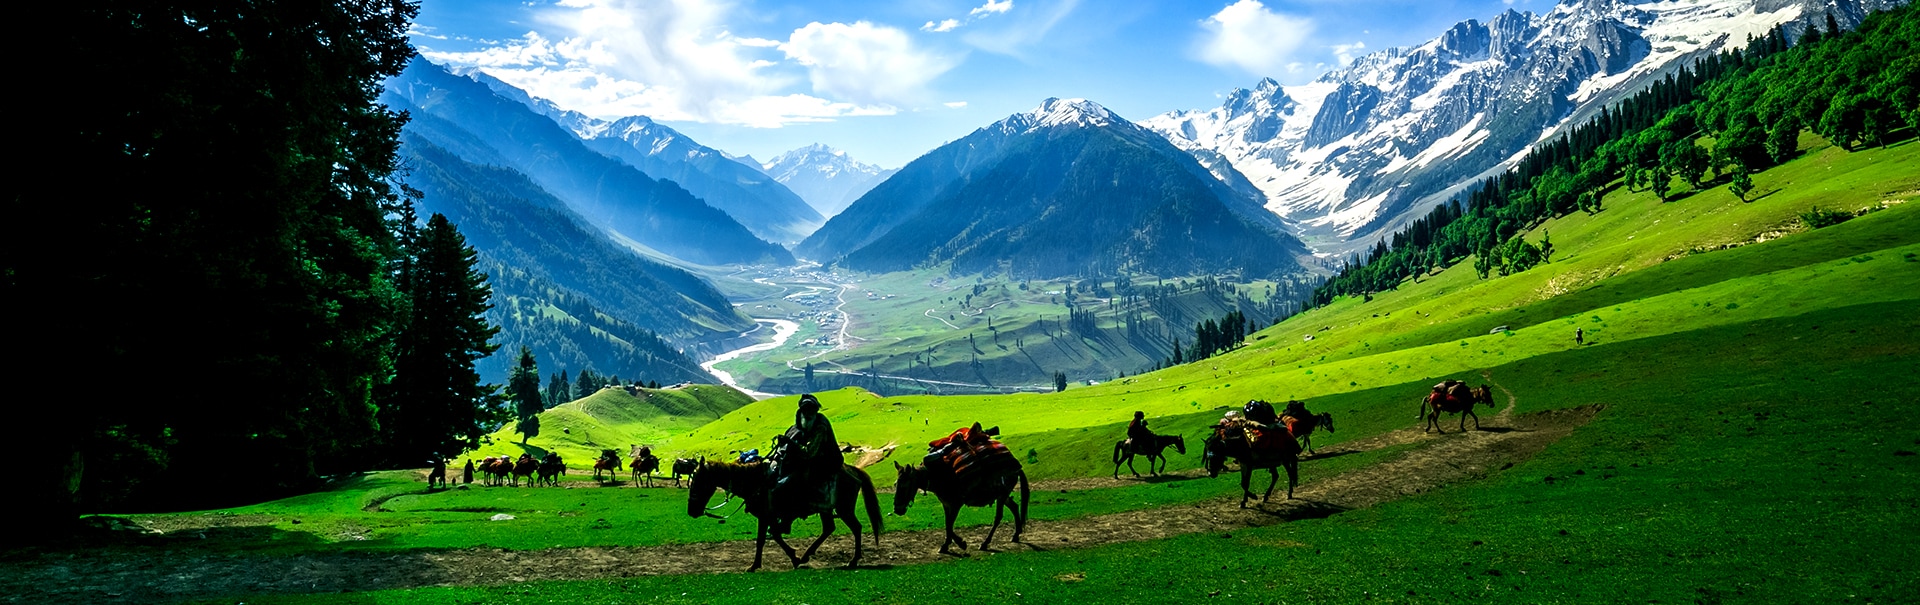 kashmir tours and travels